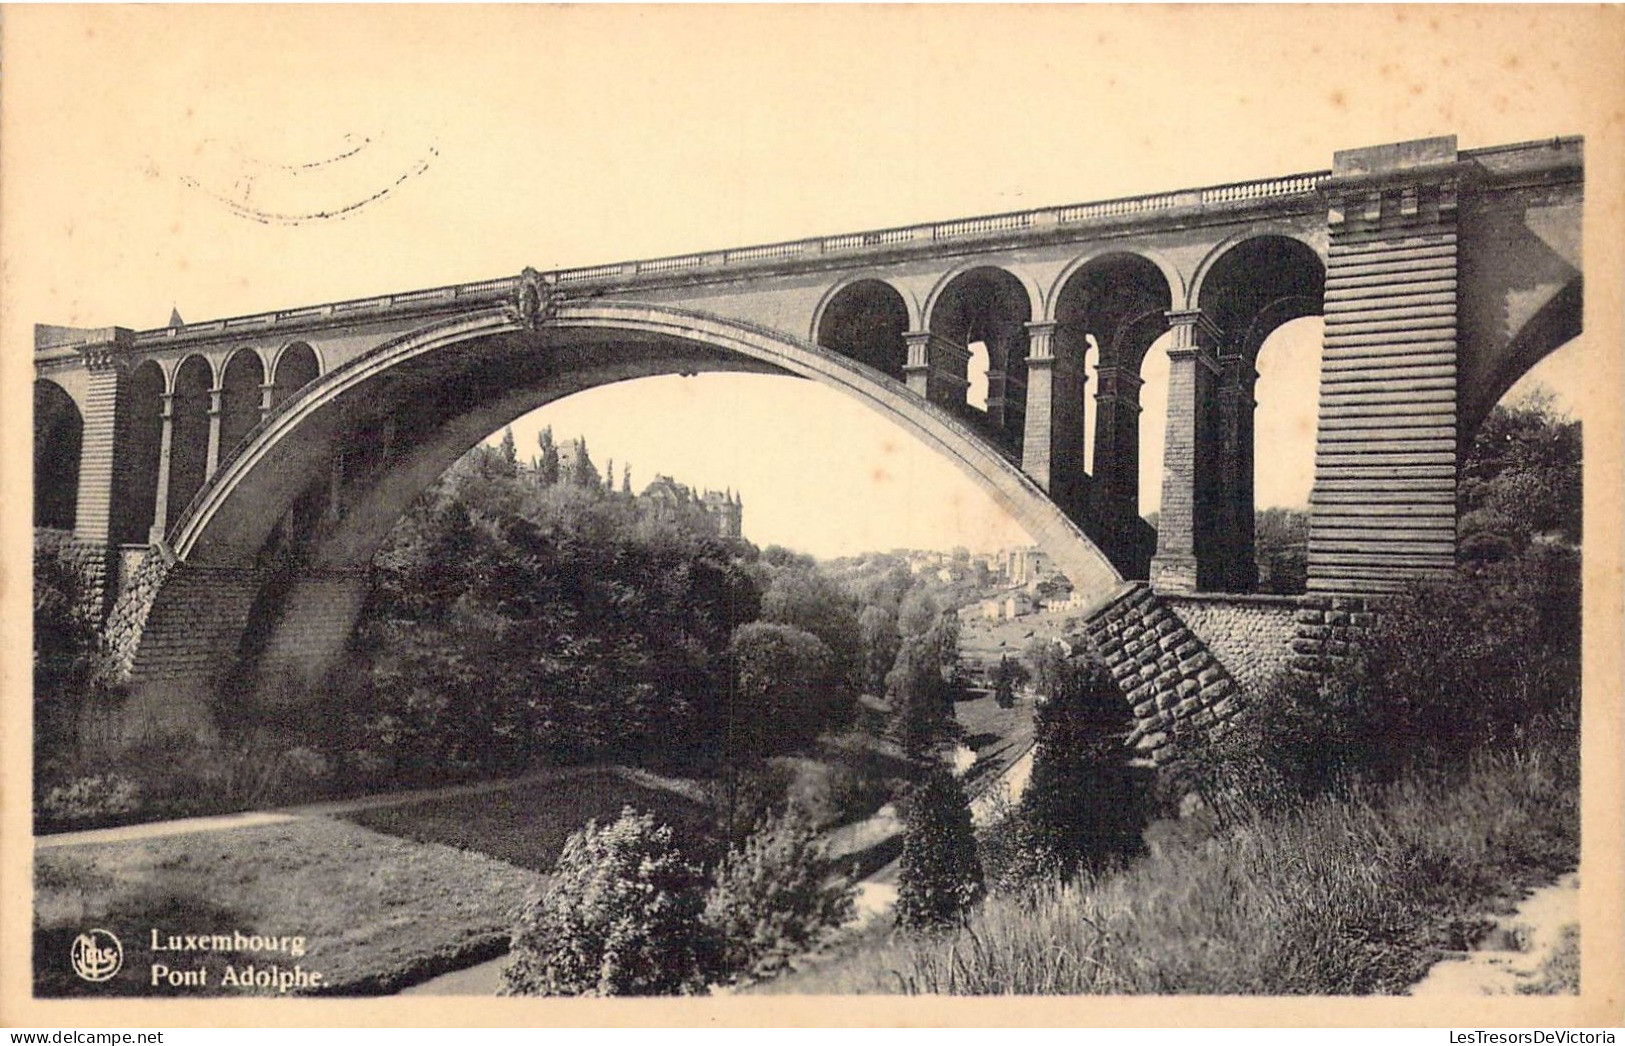 LUXEMBOURG - Ville - Pont Adolphe - Carte Postale Ancienne - Luxembourg - Ville